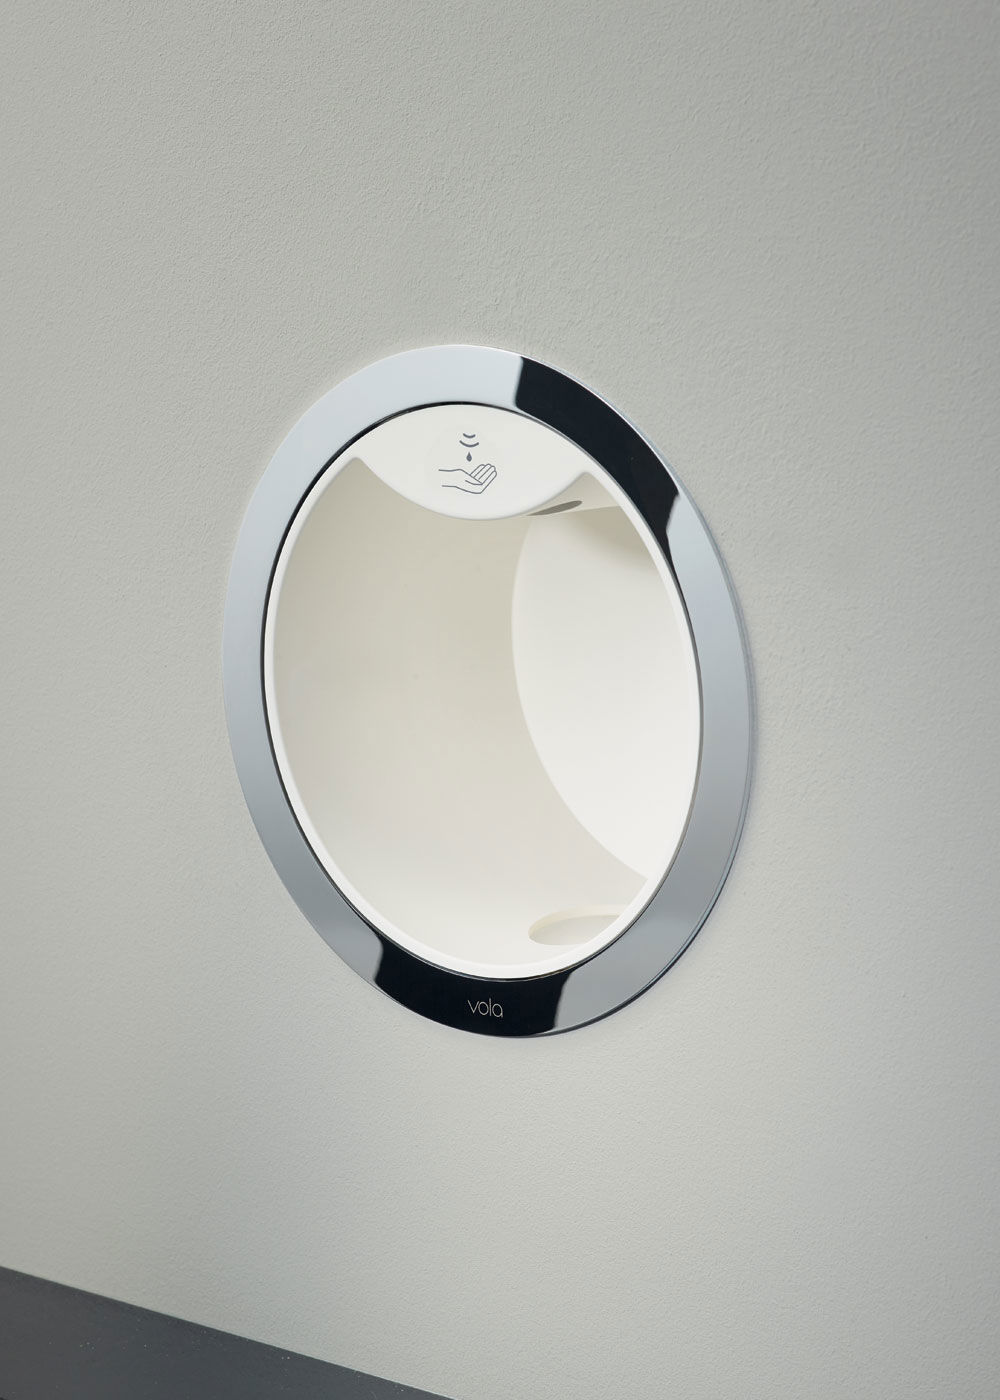 Interior Innovation Award 2014  goes to VOLA RS10 - new built-in soap dispenser